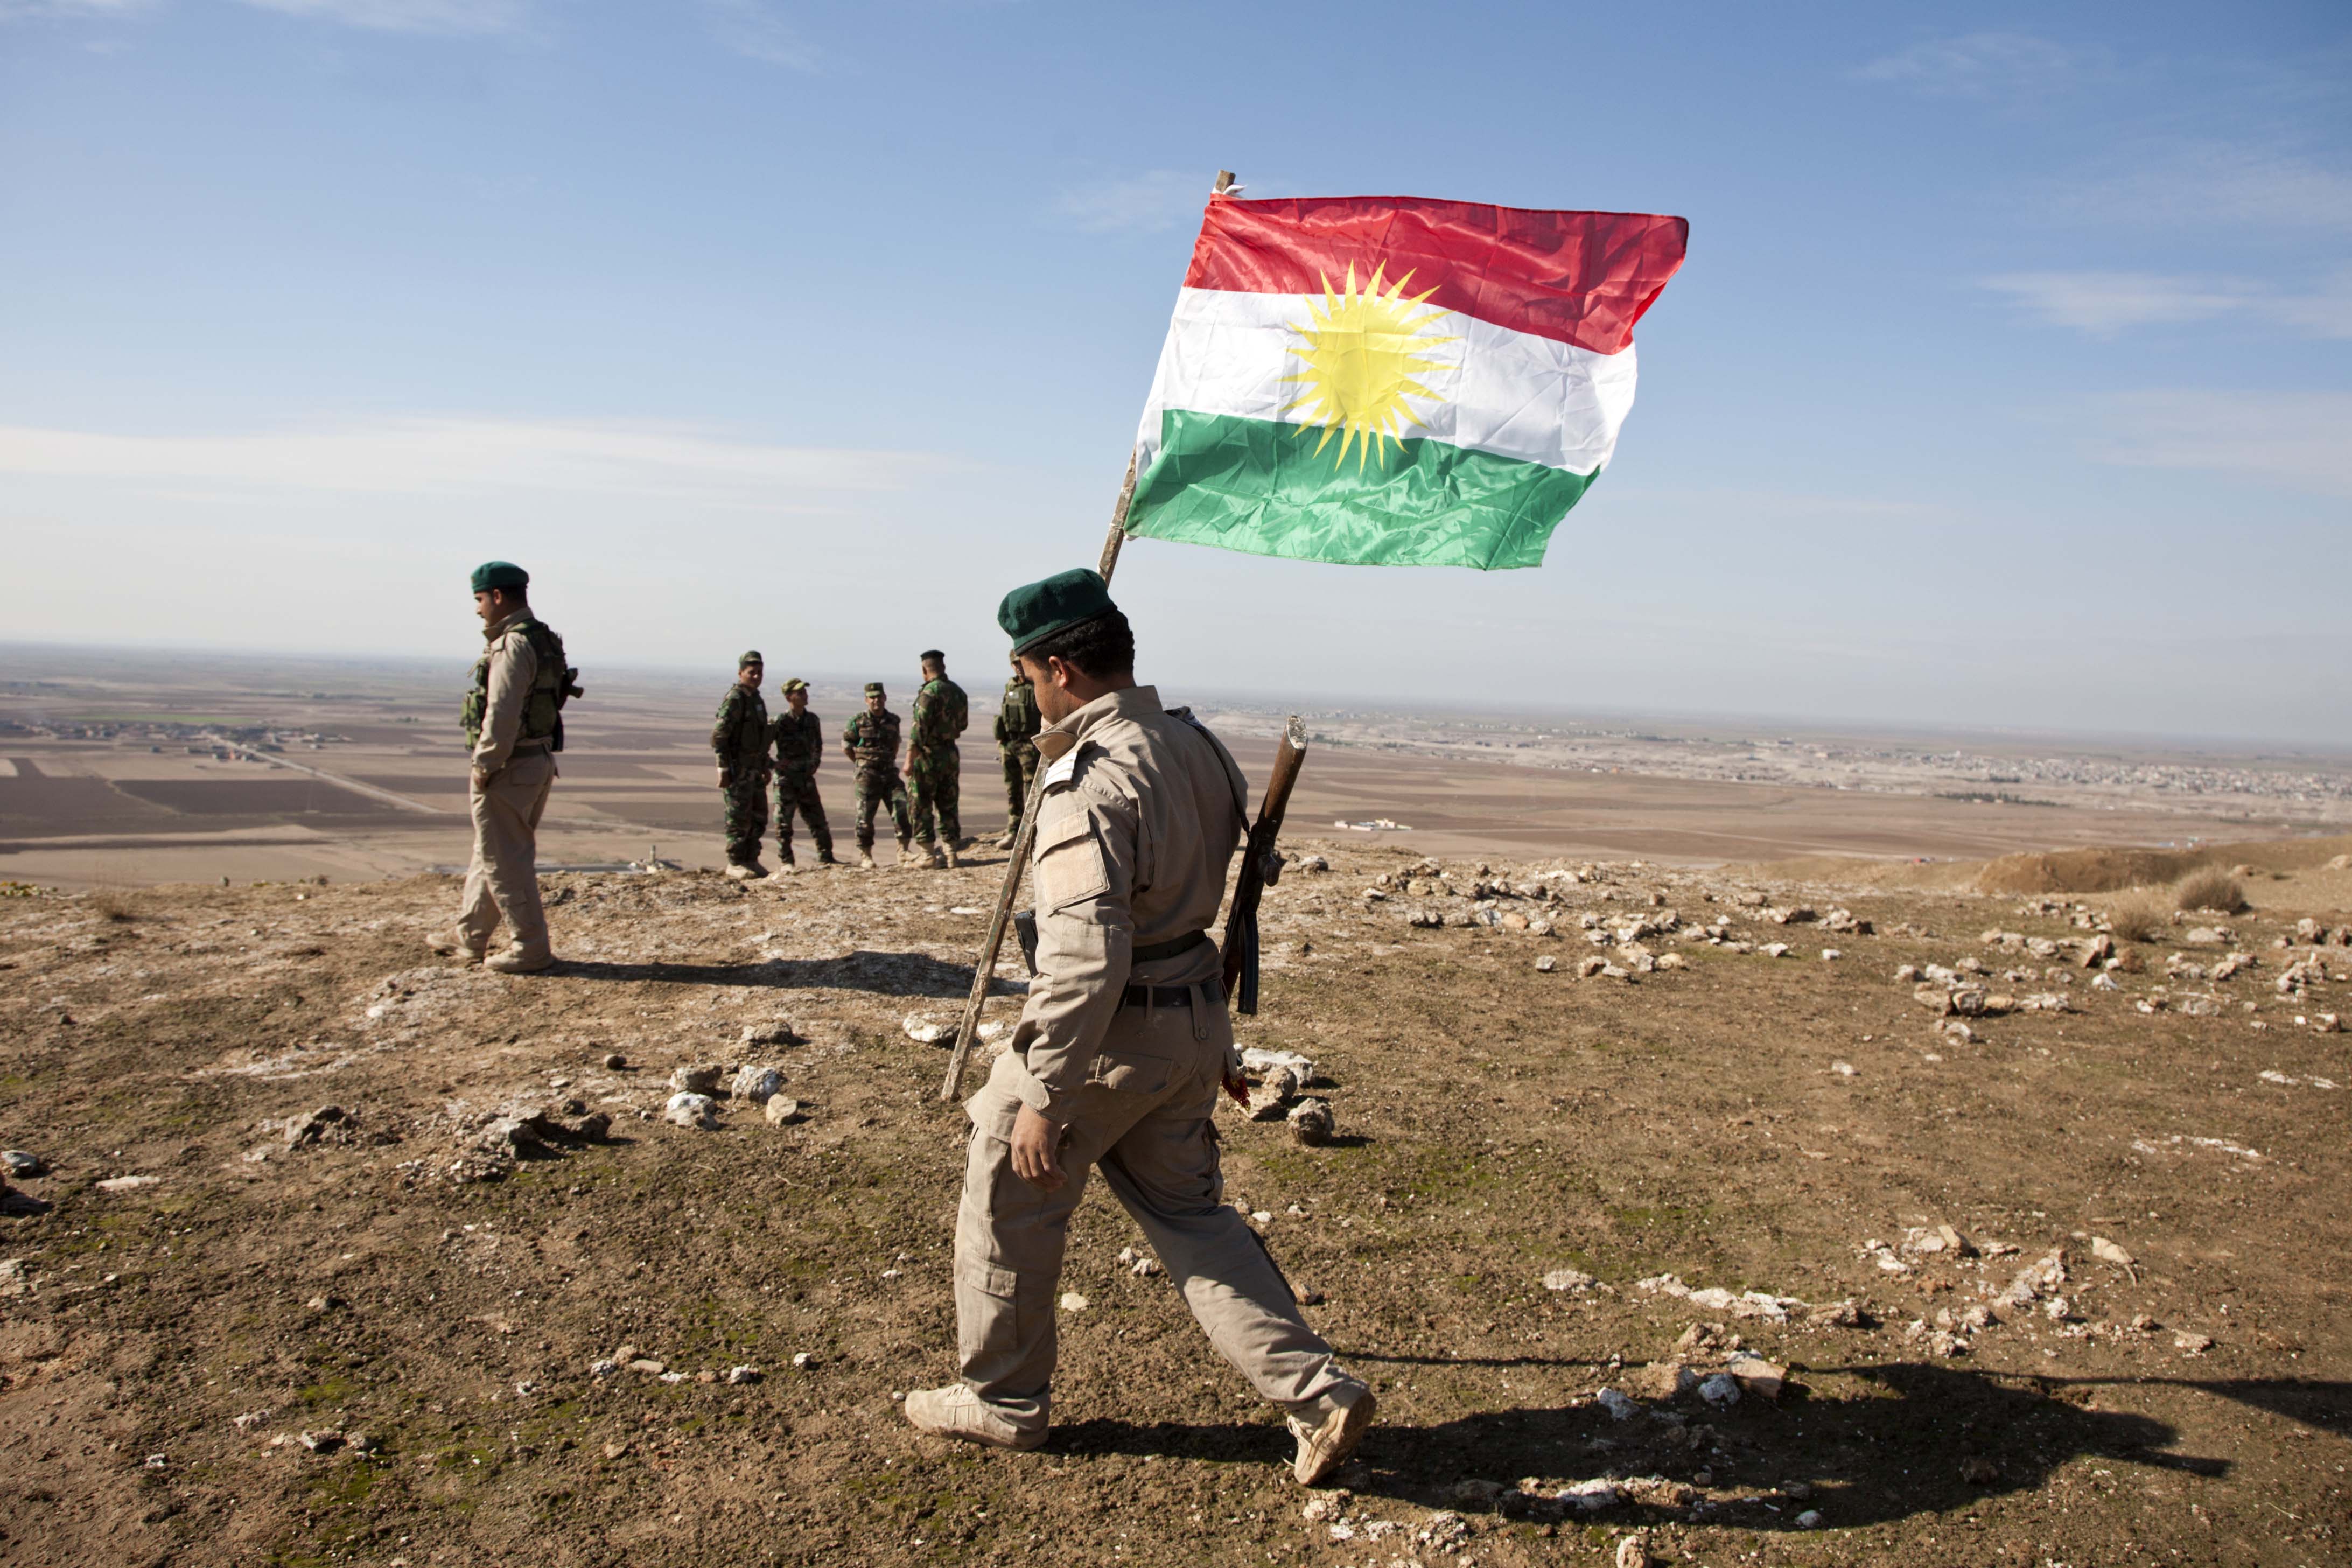 A Kurdish peshmerga fighter plants the Kurdish flag on top of a hill in the disputed territories.